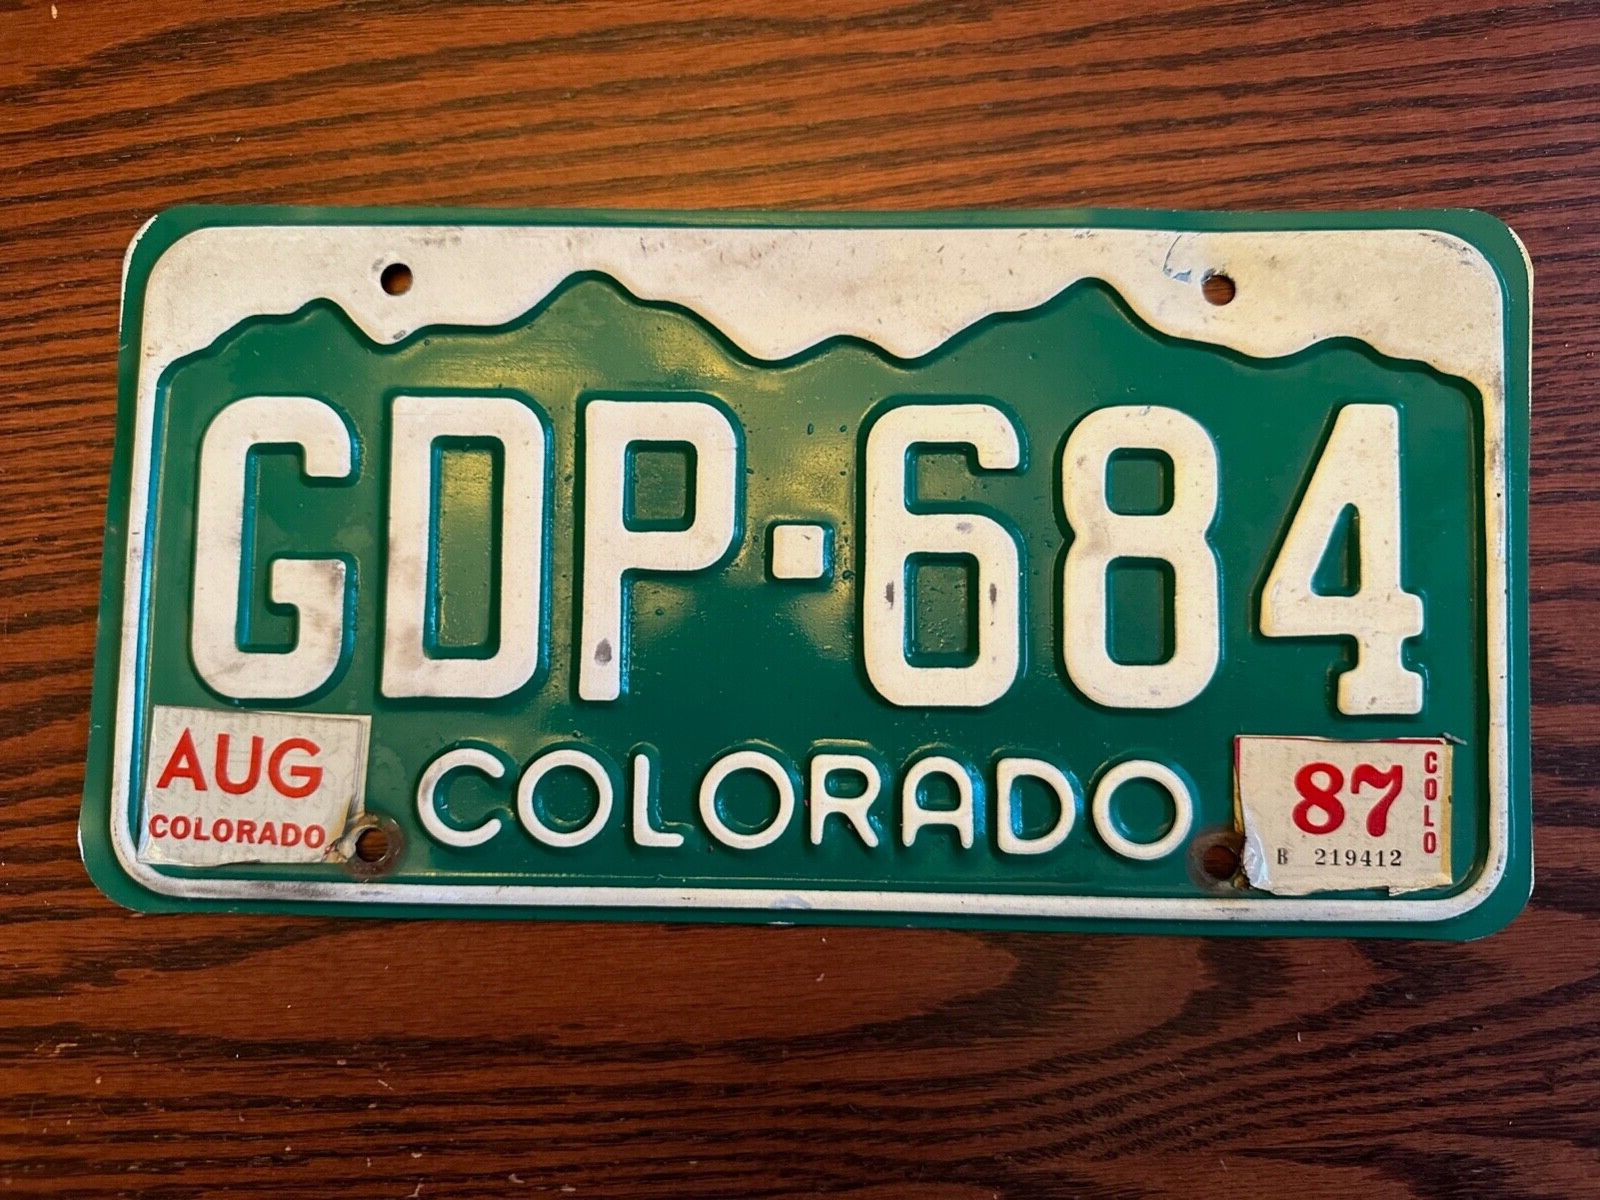 1987 Colorado License Plate GDP 684 Green Mountain CO USA Authentic Metal August